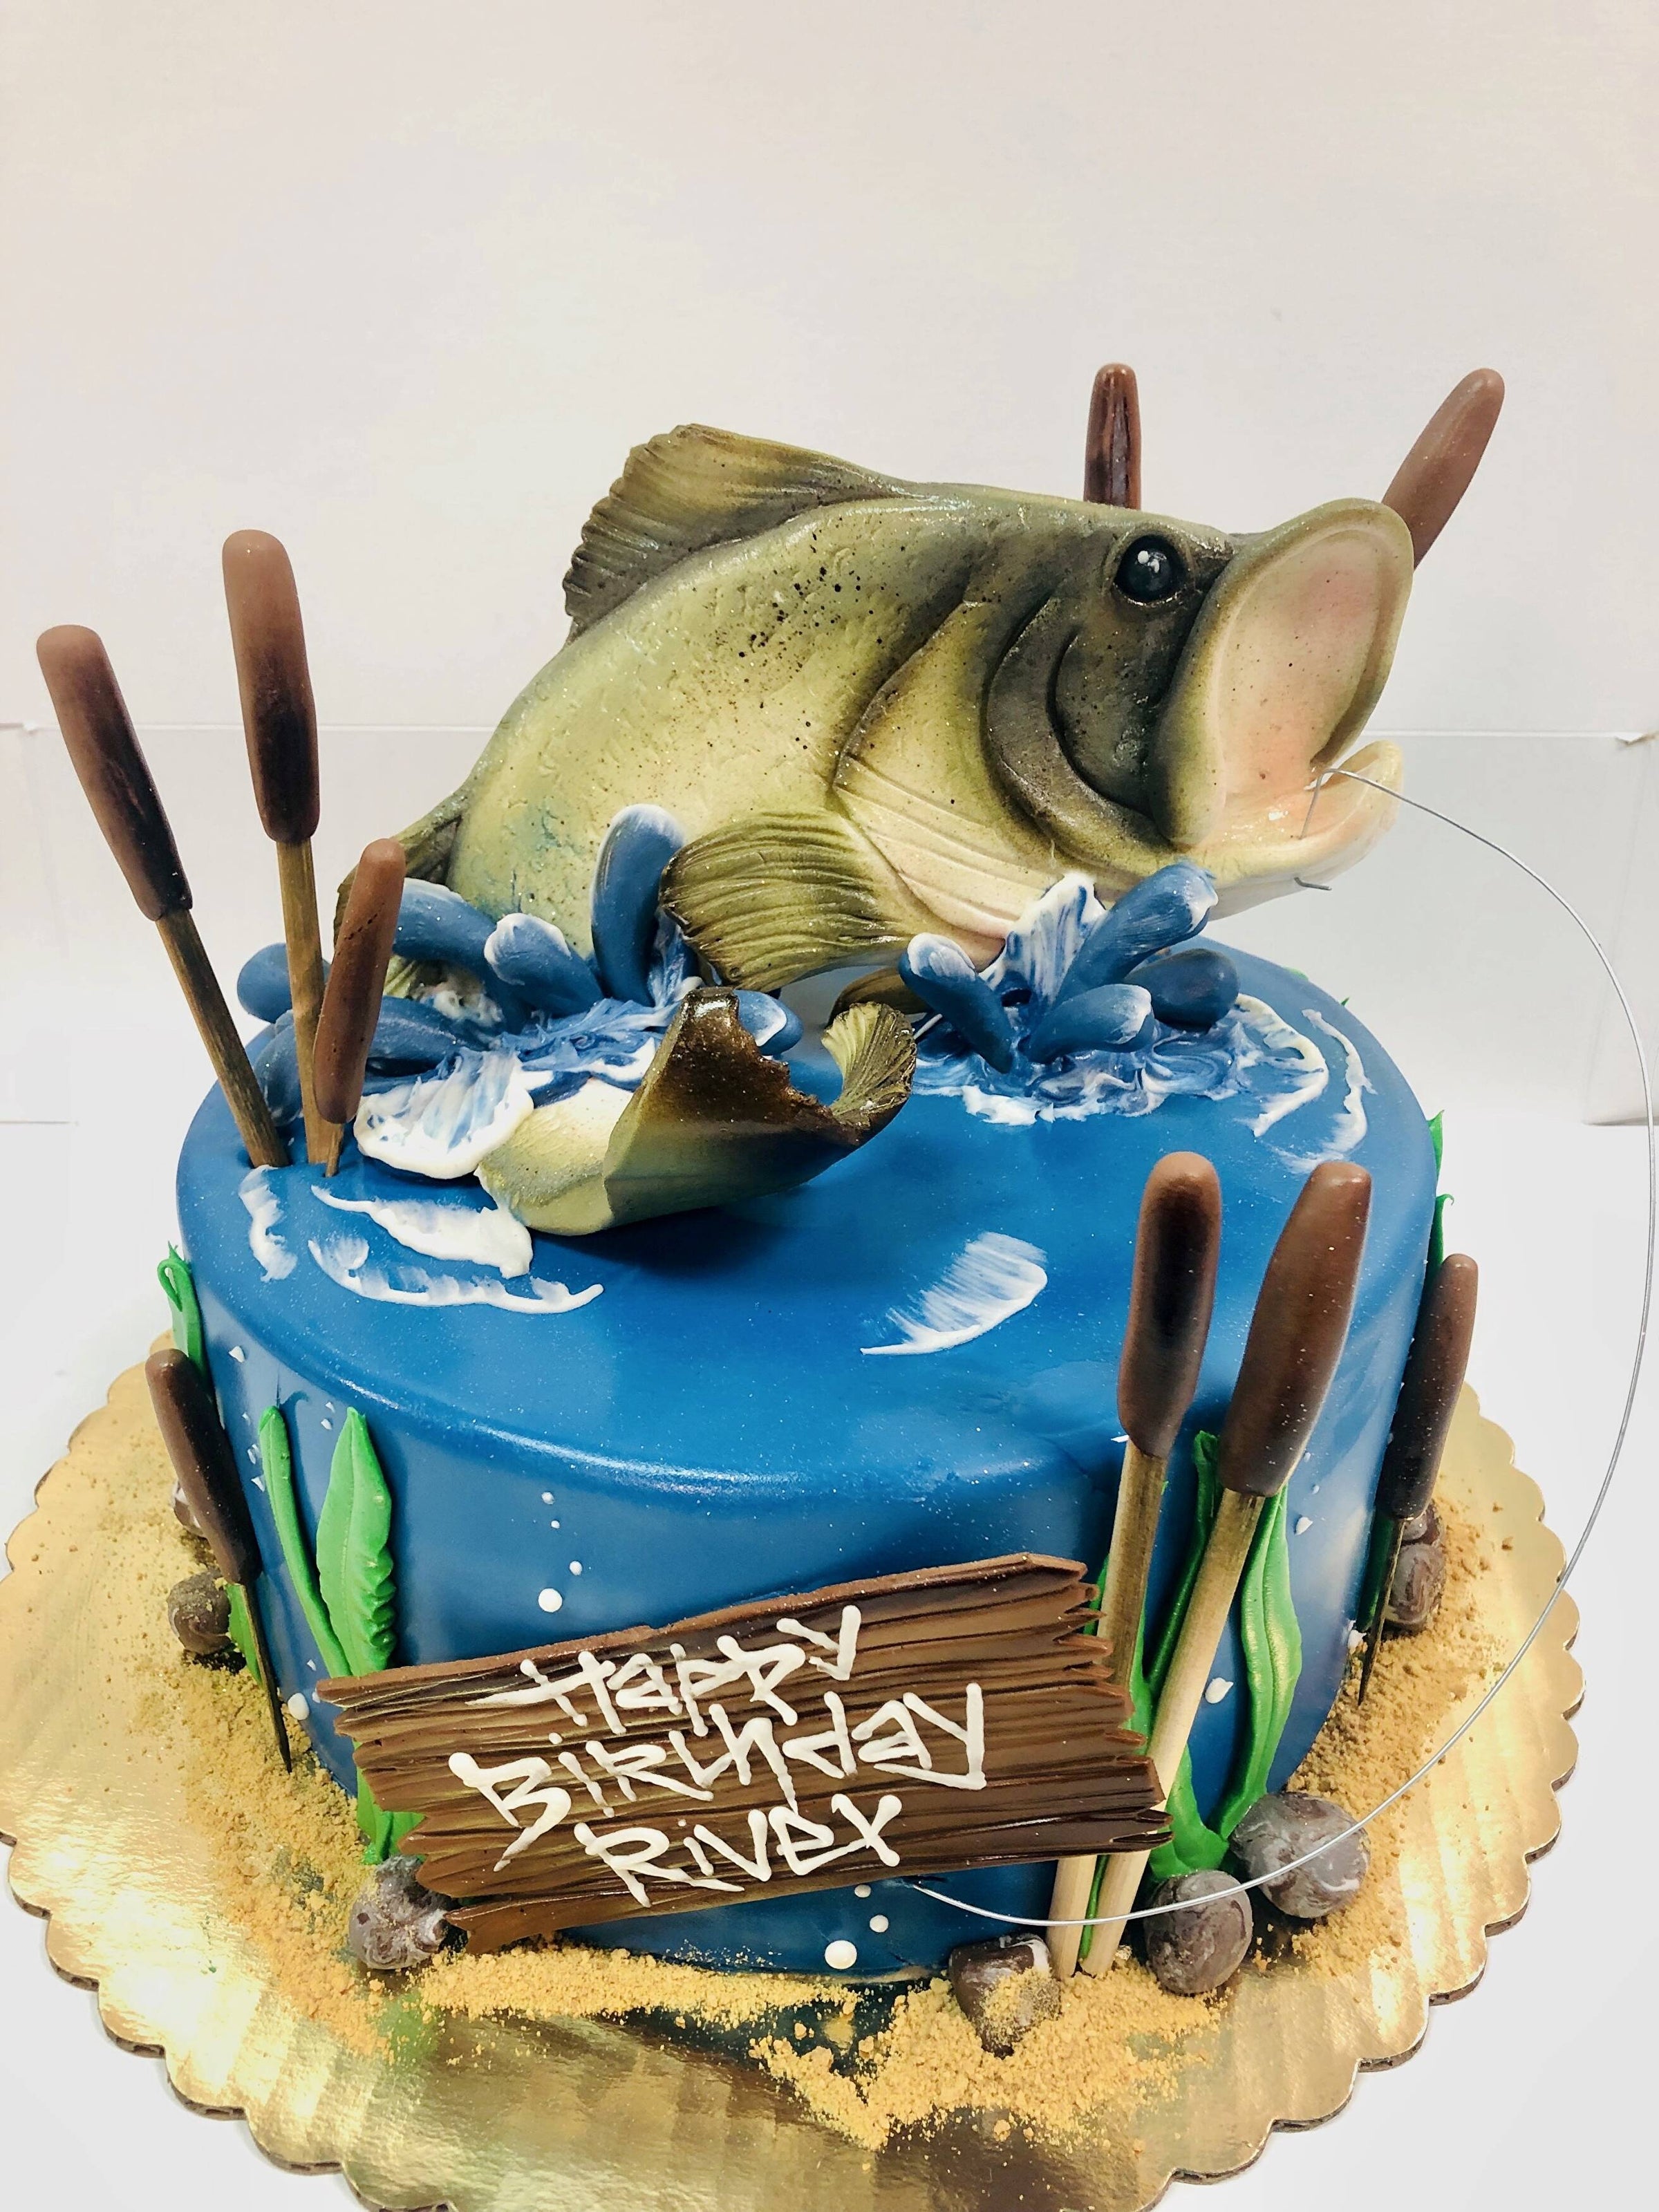 Fishing-Hunting Cakes  Coccadotts Cake Shop - Myrtle Beach